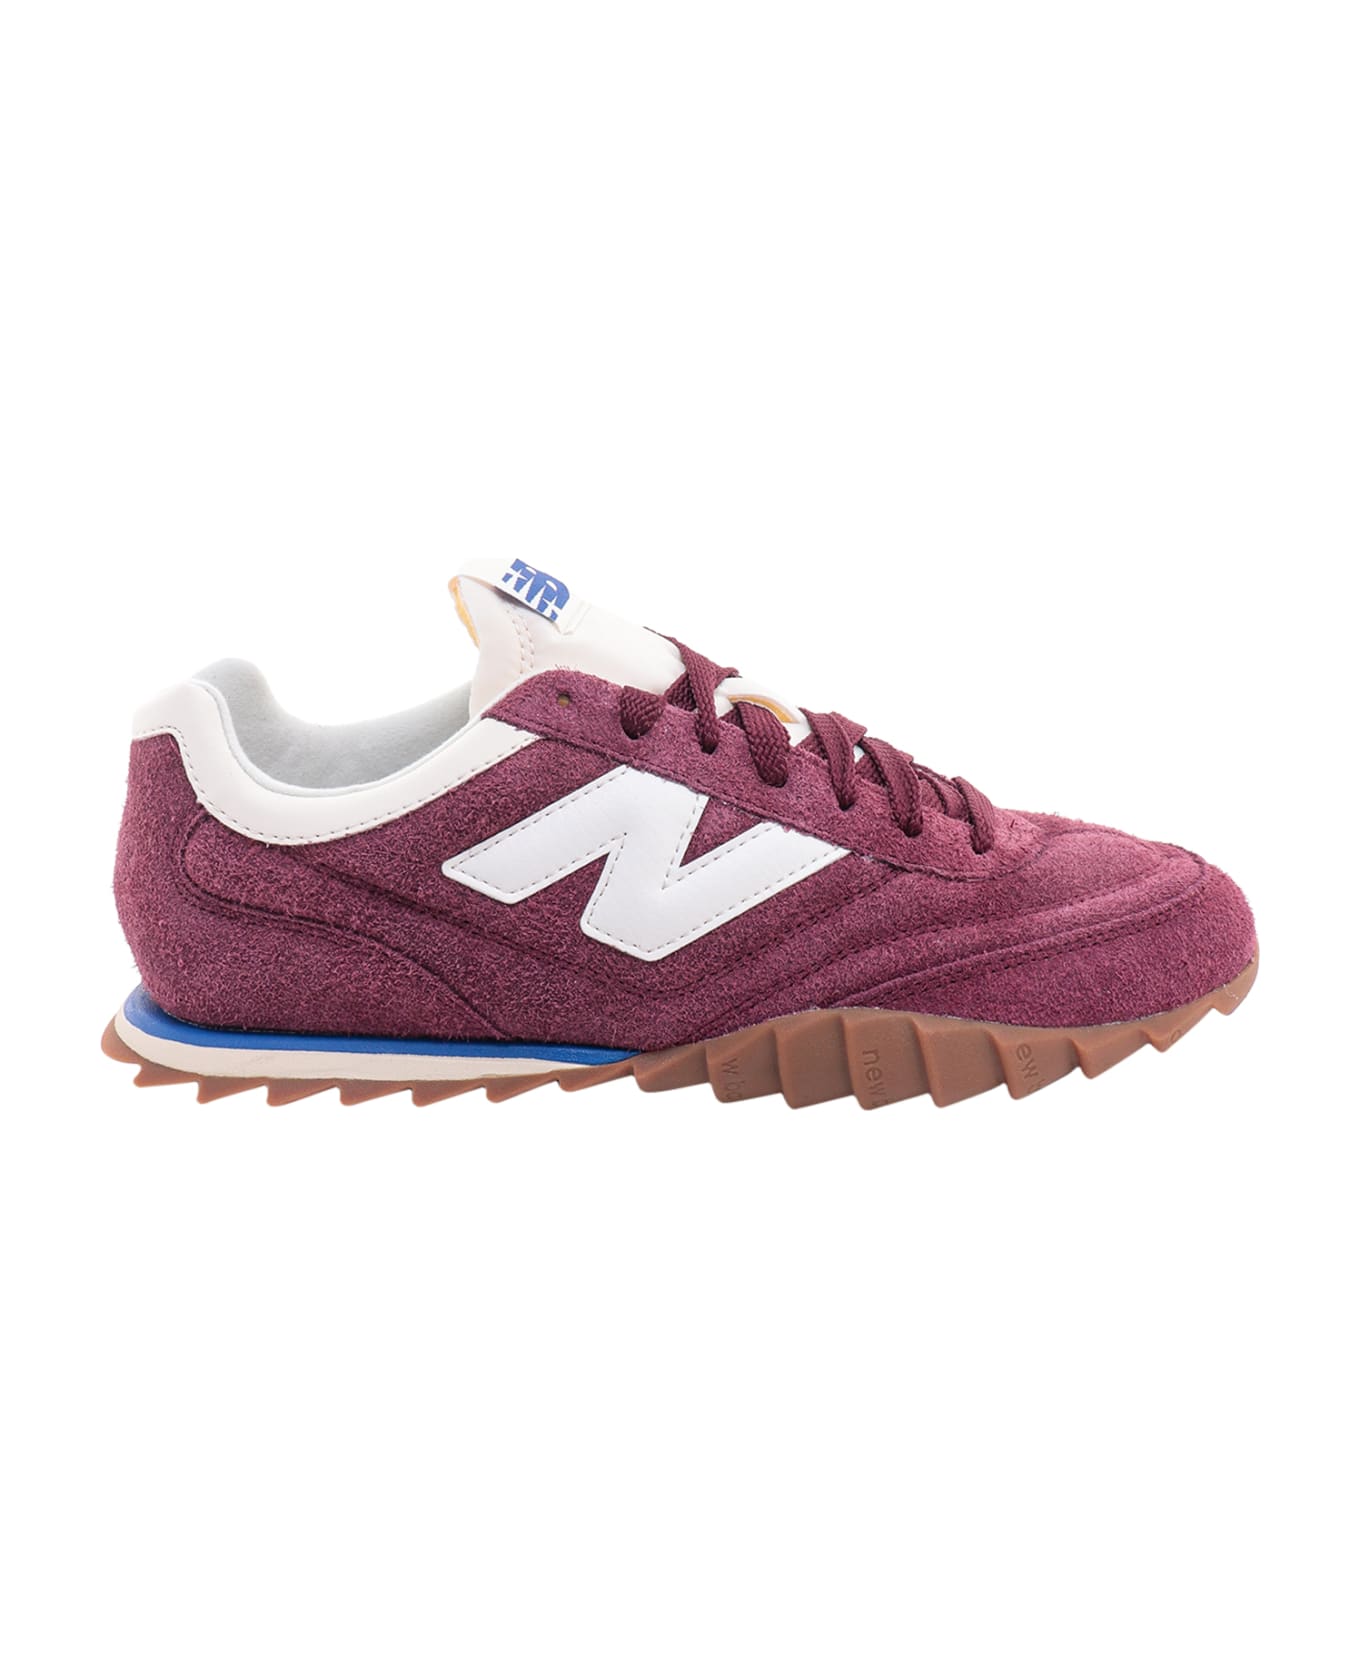 New Balance Sneakers - Red